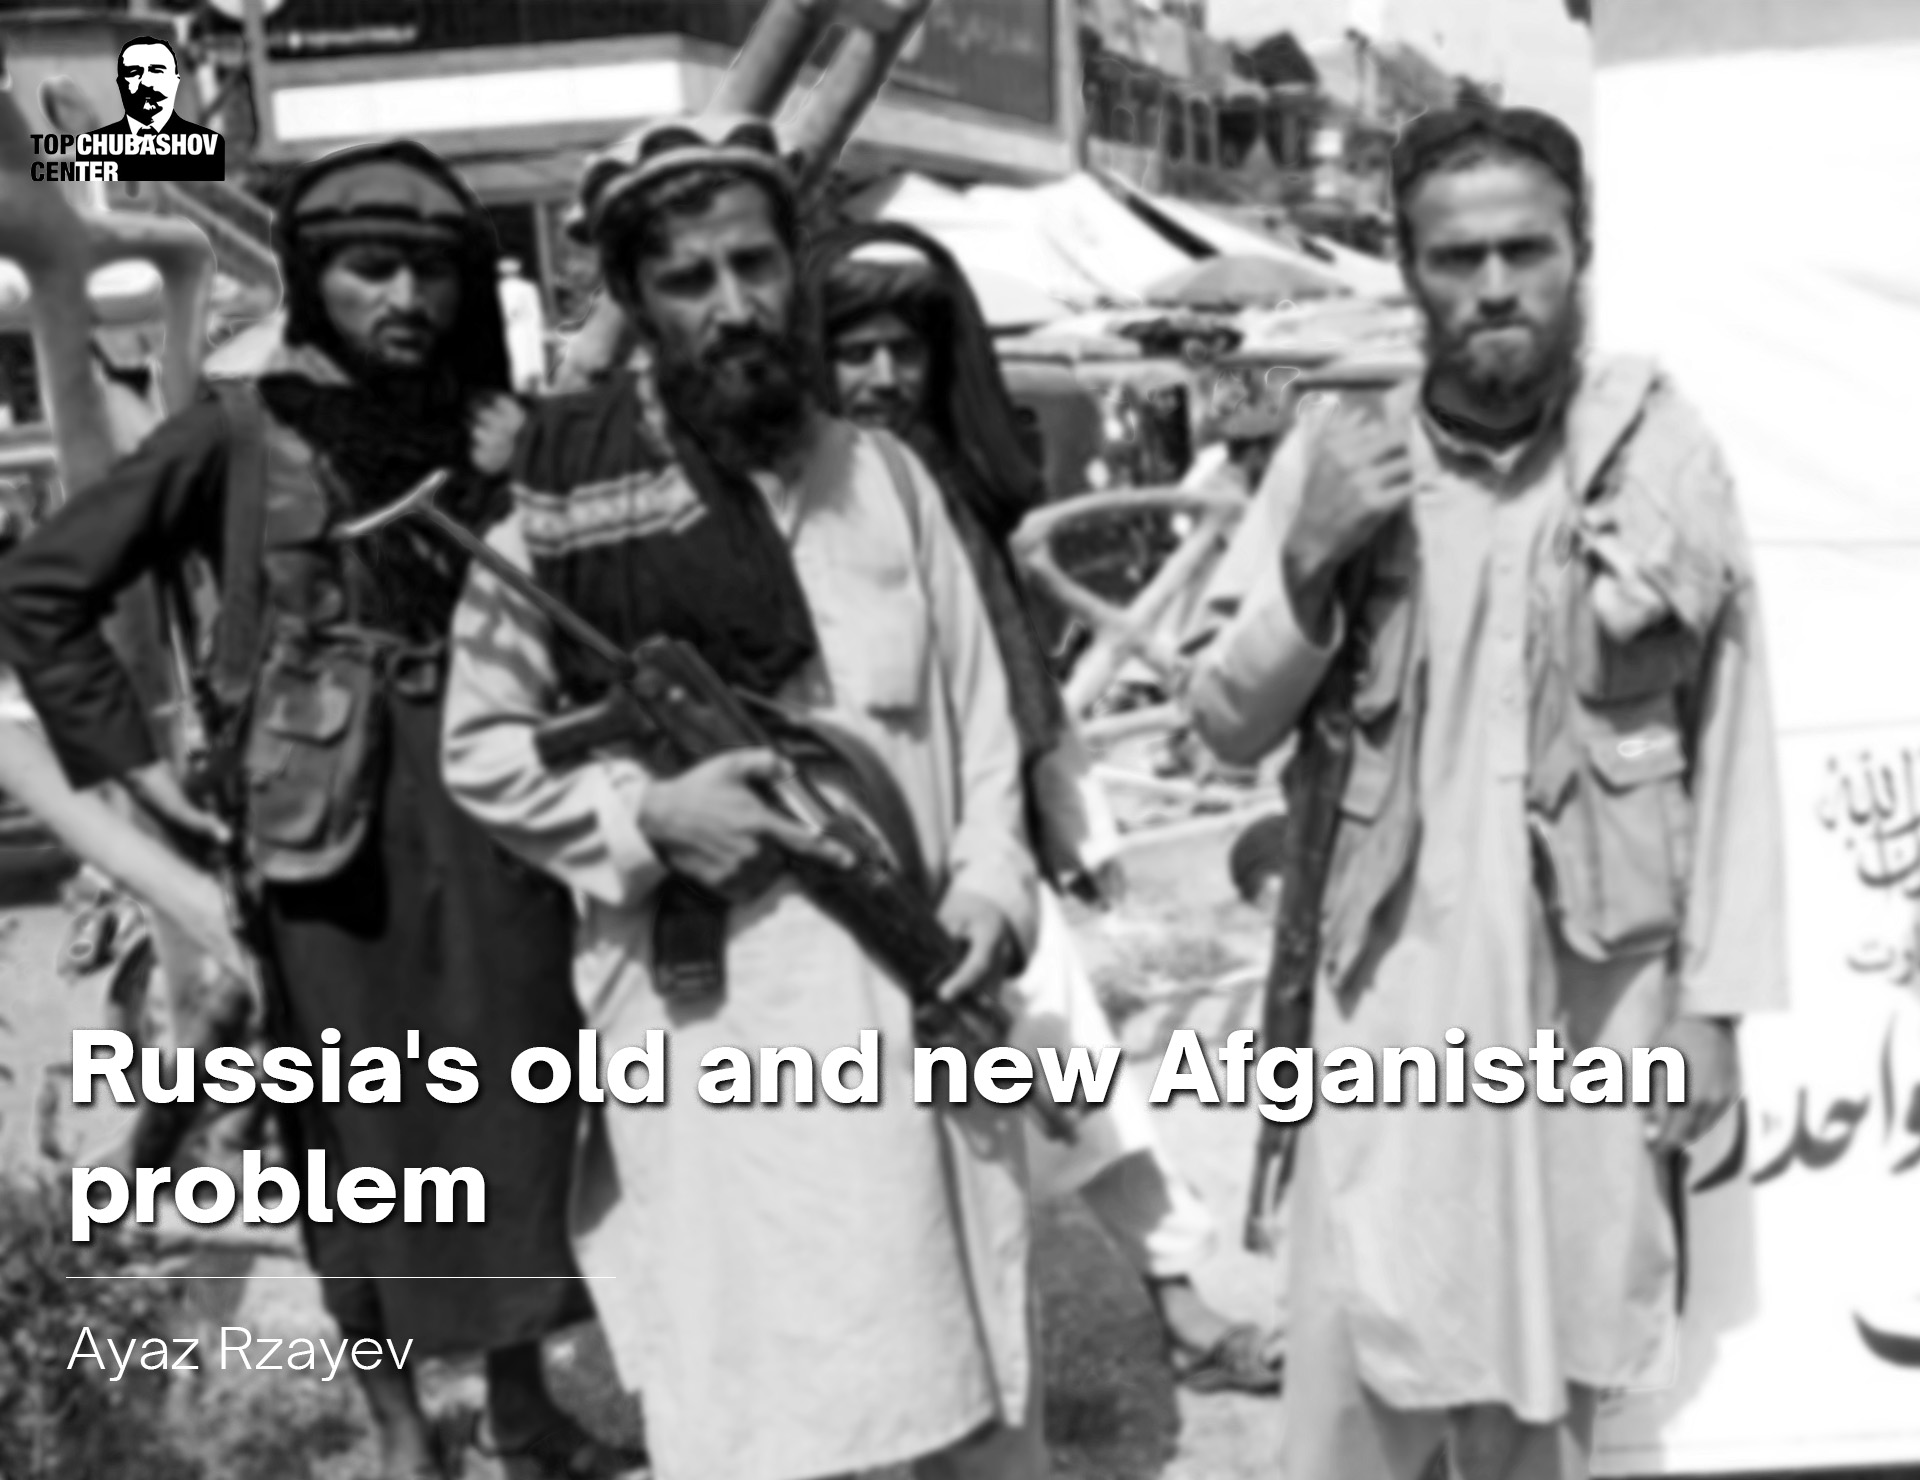 Russia's old and new Afganistan problem